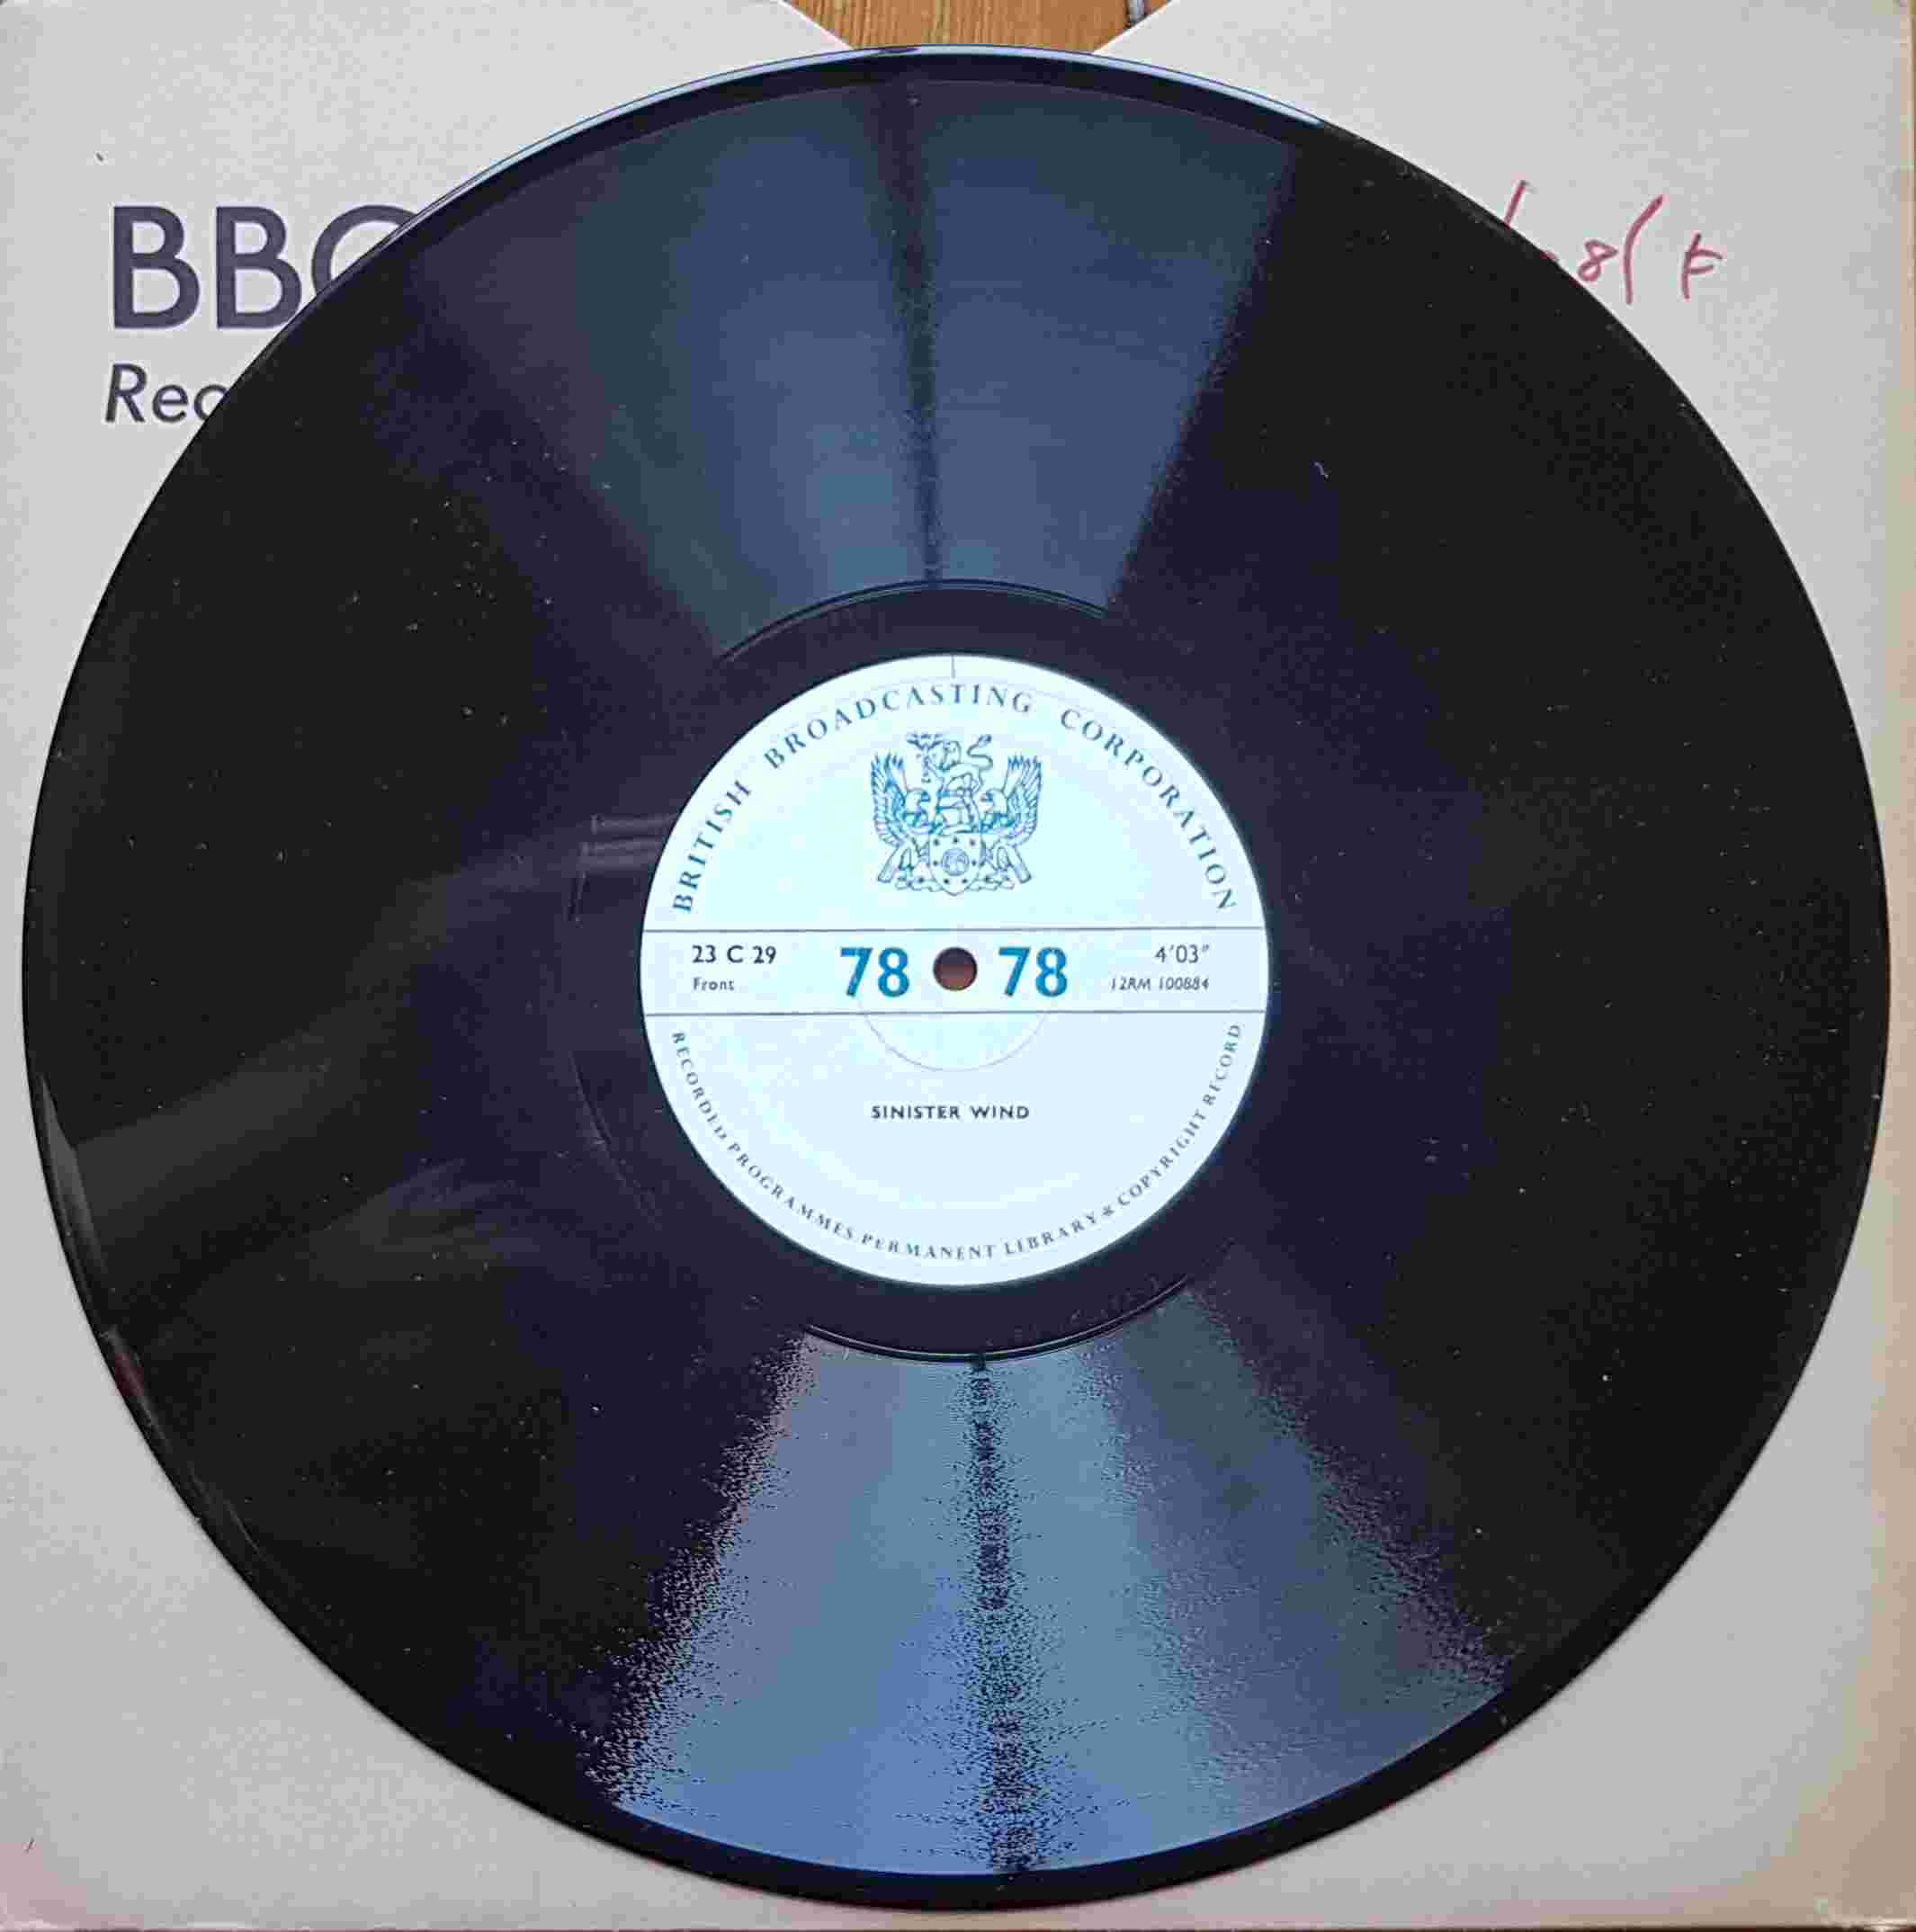 Picture of 23 C 29 Wind by artist Not registered from the BBC 78 - Records and Tapes library